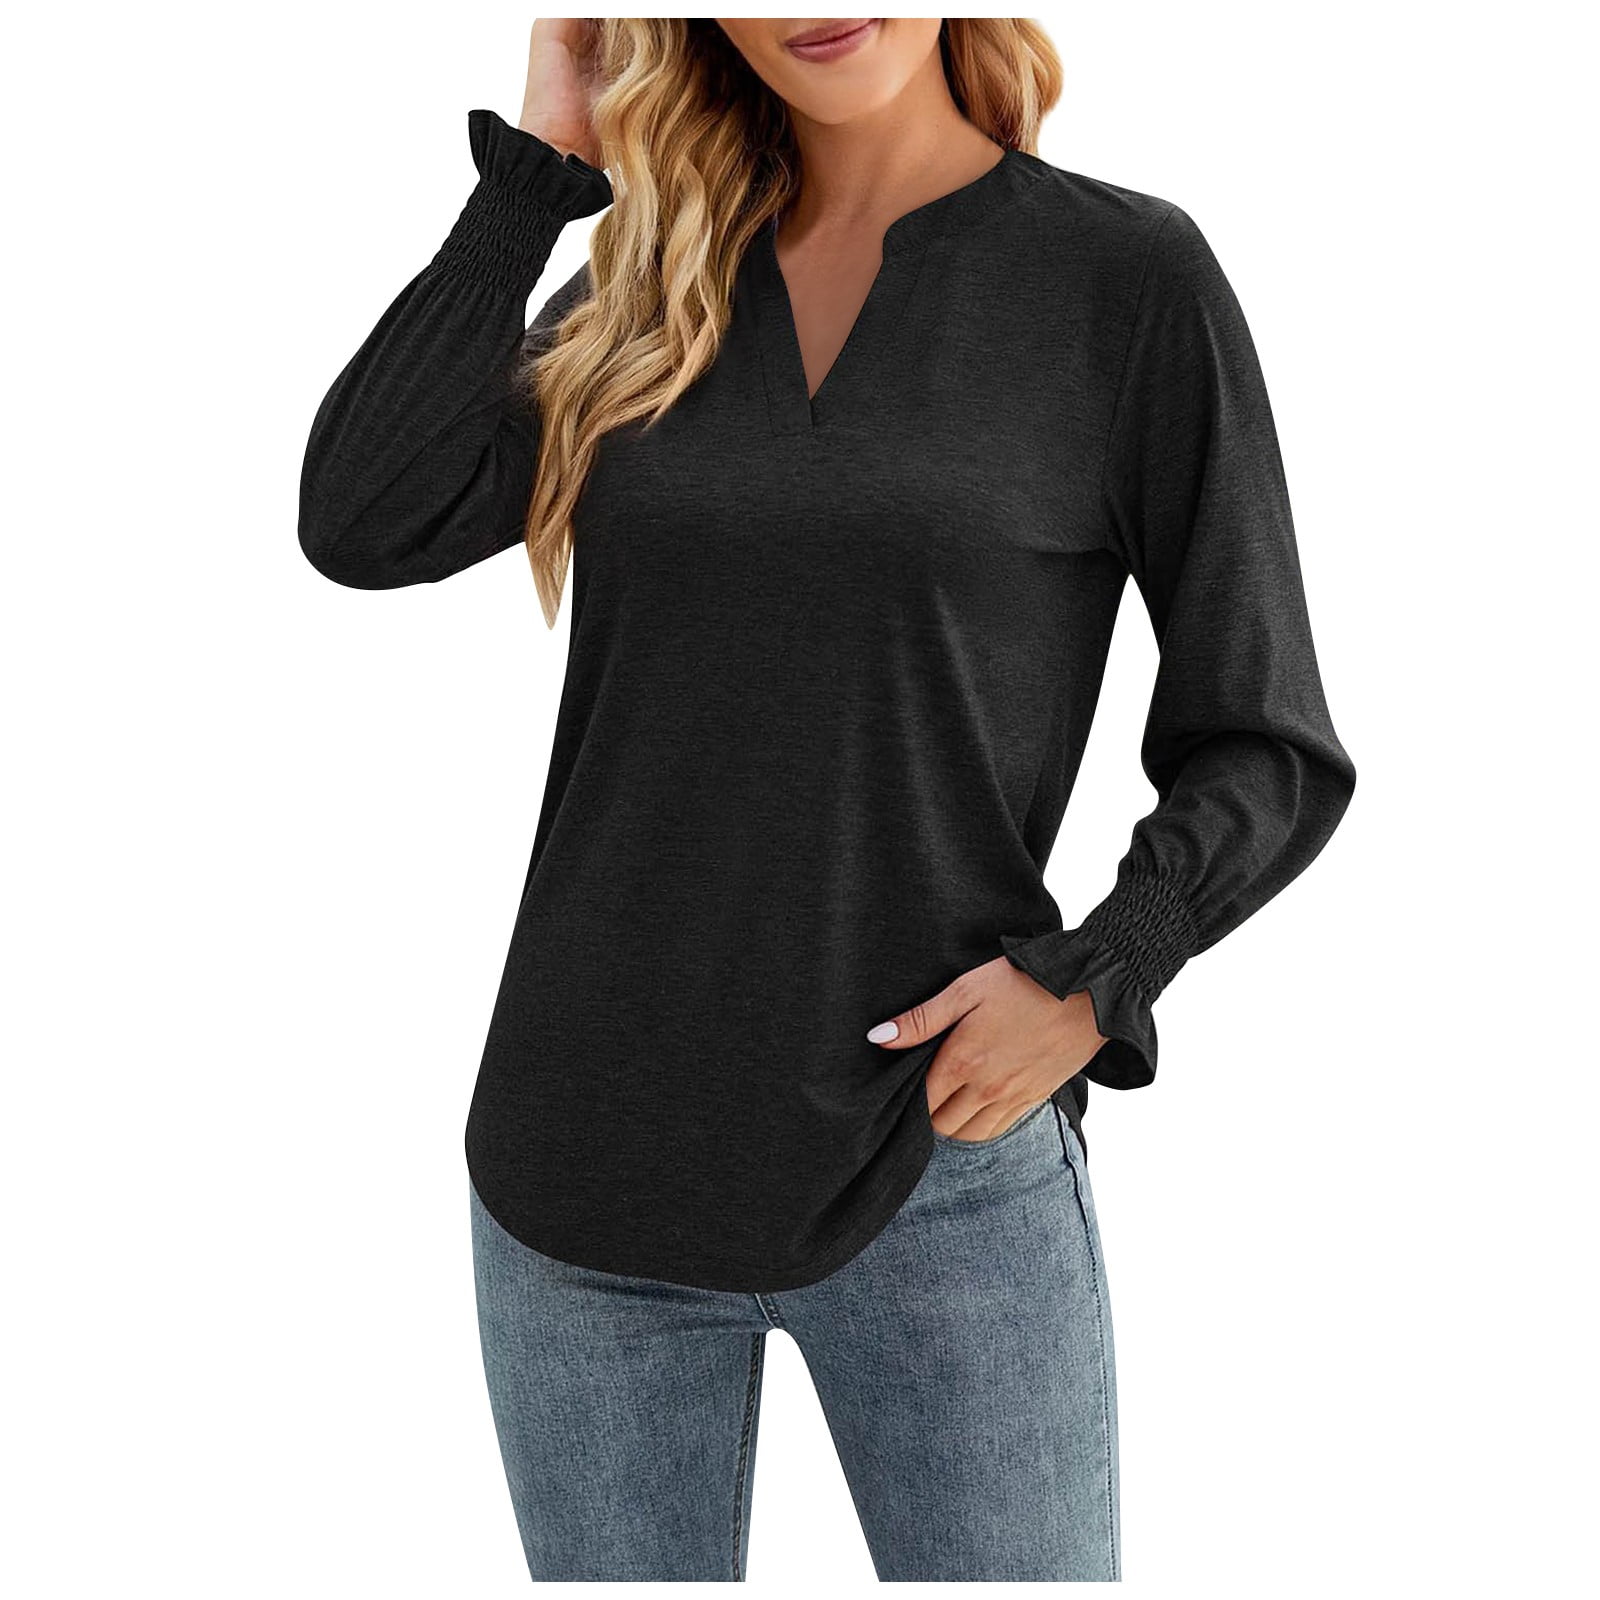  Sokhug black shirt friday Fall Sweaters for Women 2023 Dressy  Casual Outfits for Women Women Sweatshirts No Hood Women Graphic Tee Shirt  black deals friday Warehouse Clearance Items : Sports 